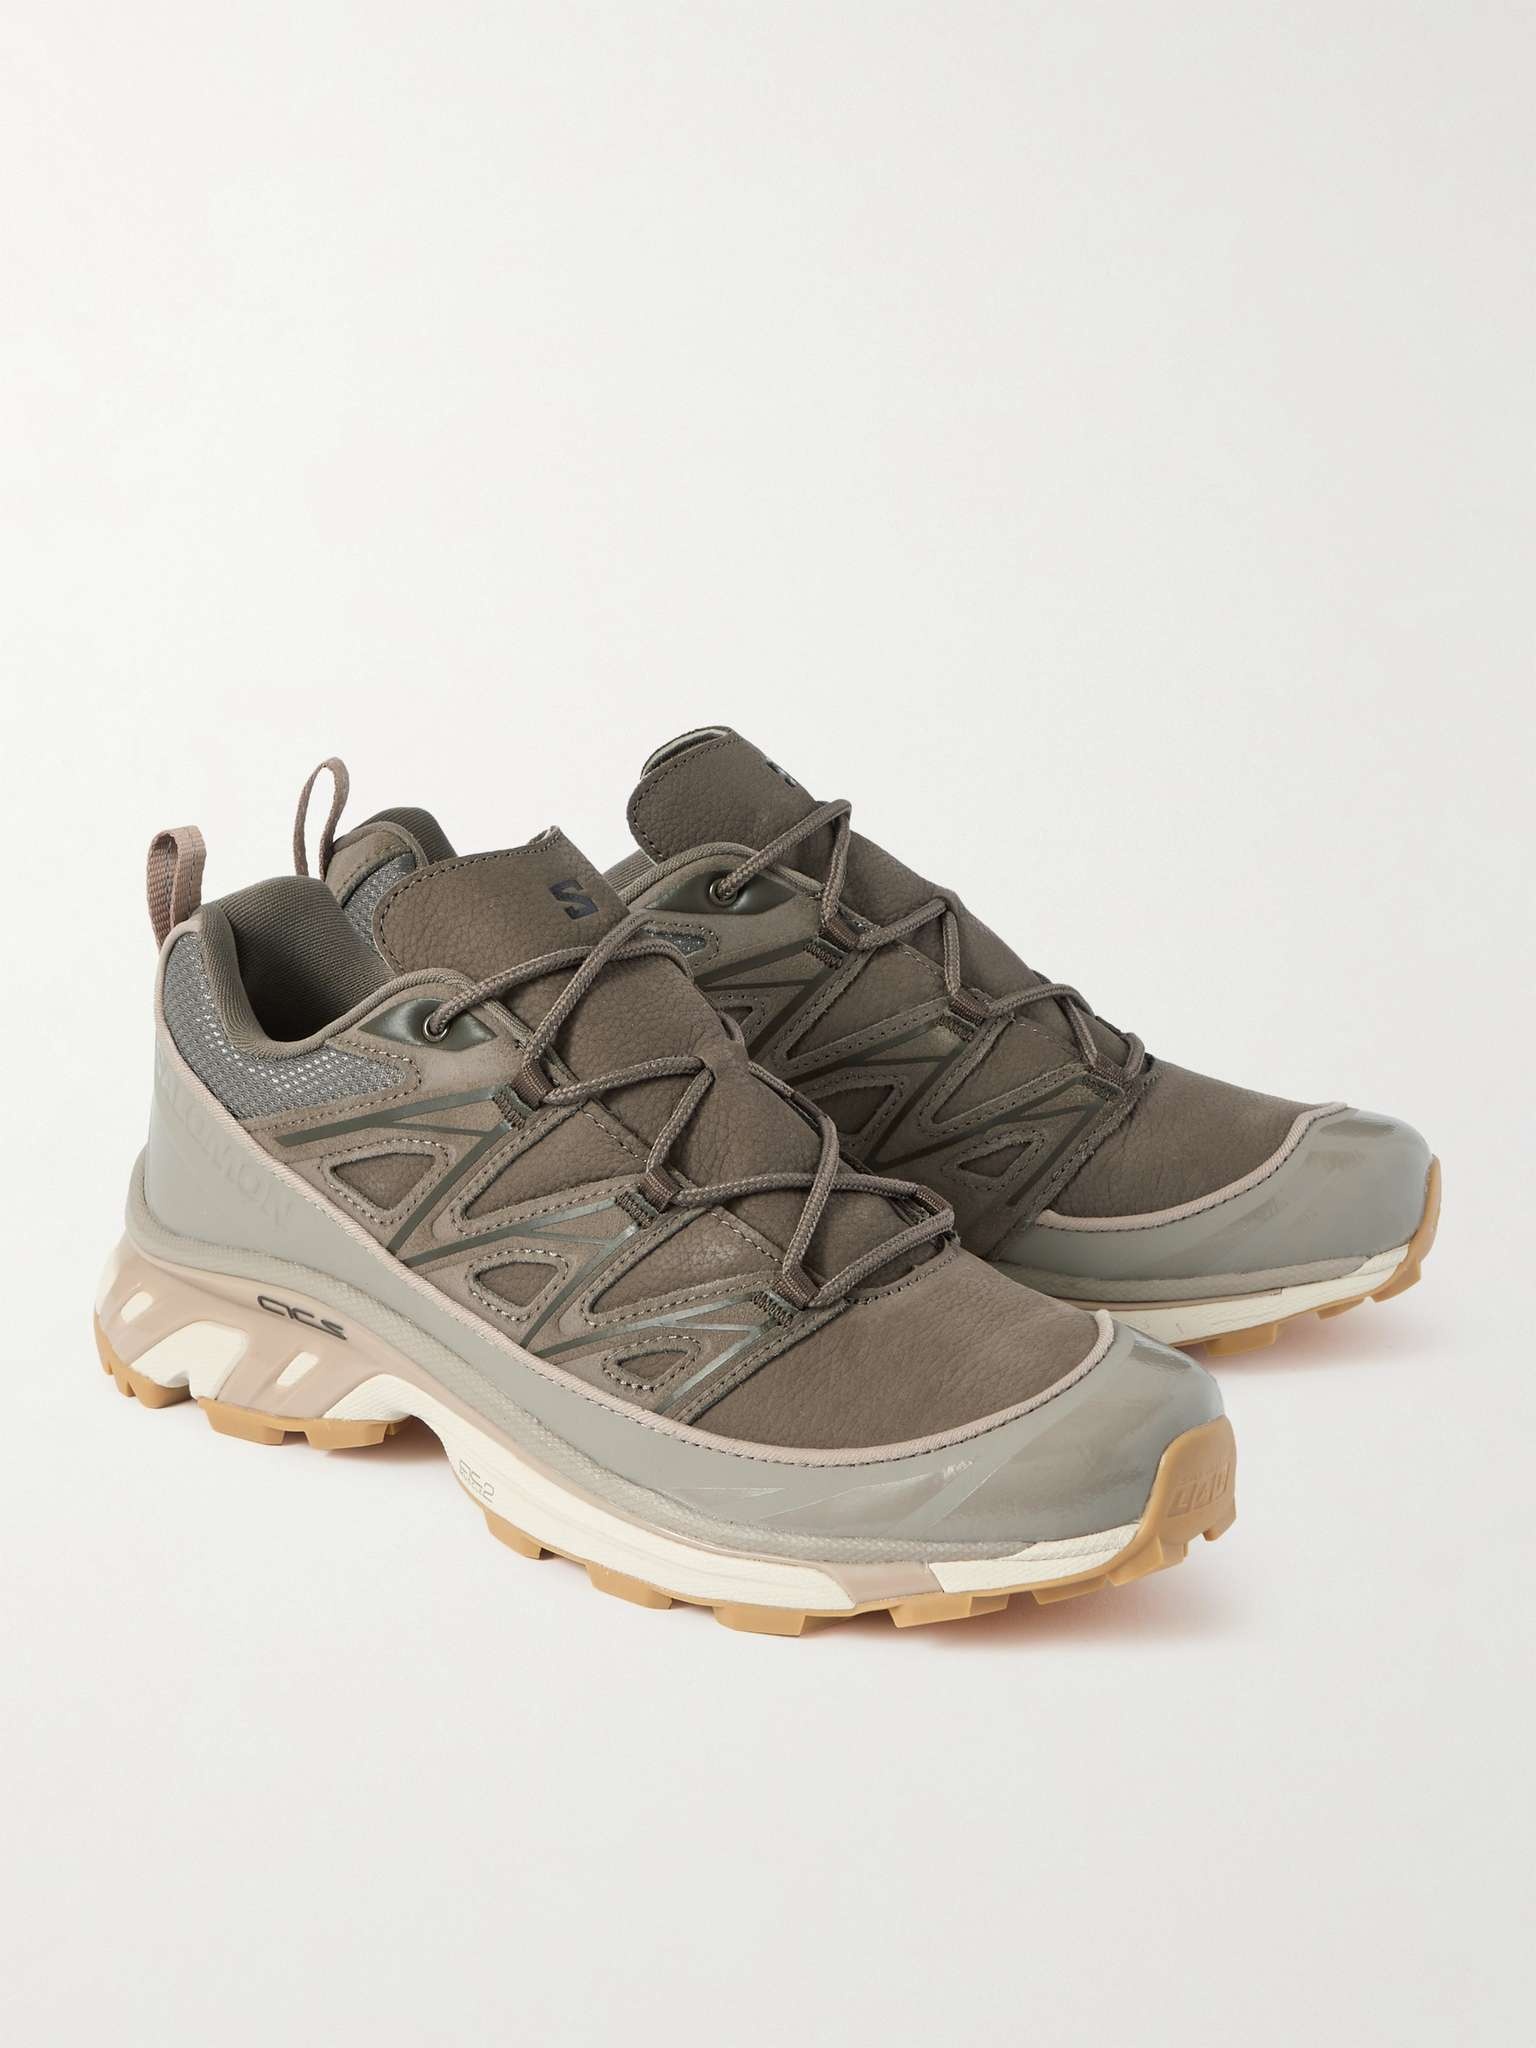 XT-6 Expanse LTR Mesh-Trimmed Suede and Leather Sneakers - 4